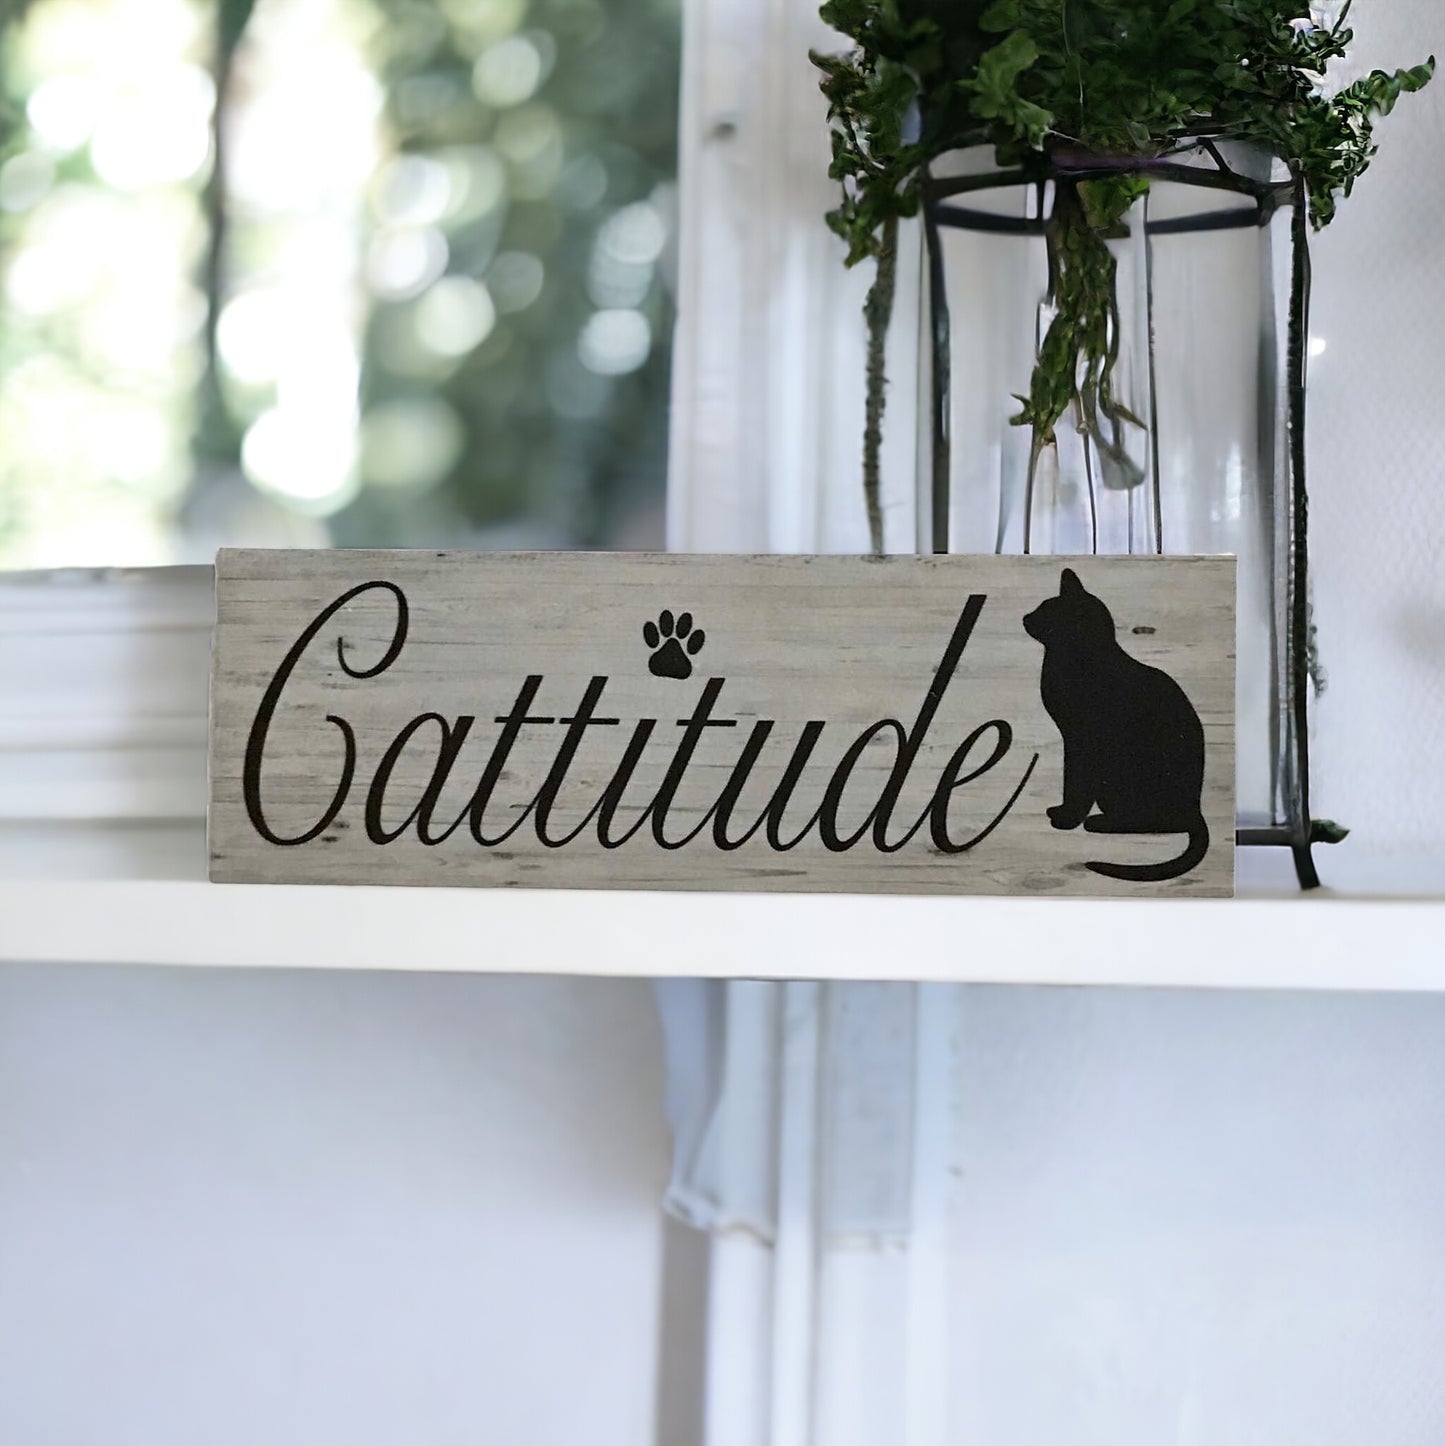 Cattitude Attitude Cat Sign - The Renmy Store Homewares & Gifts 